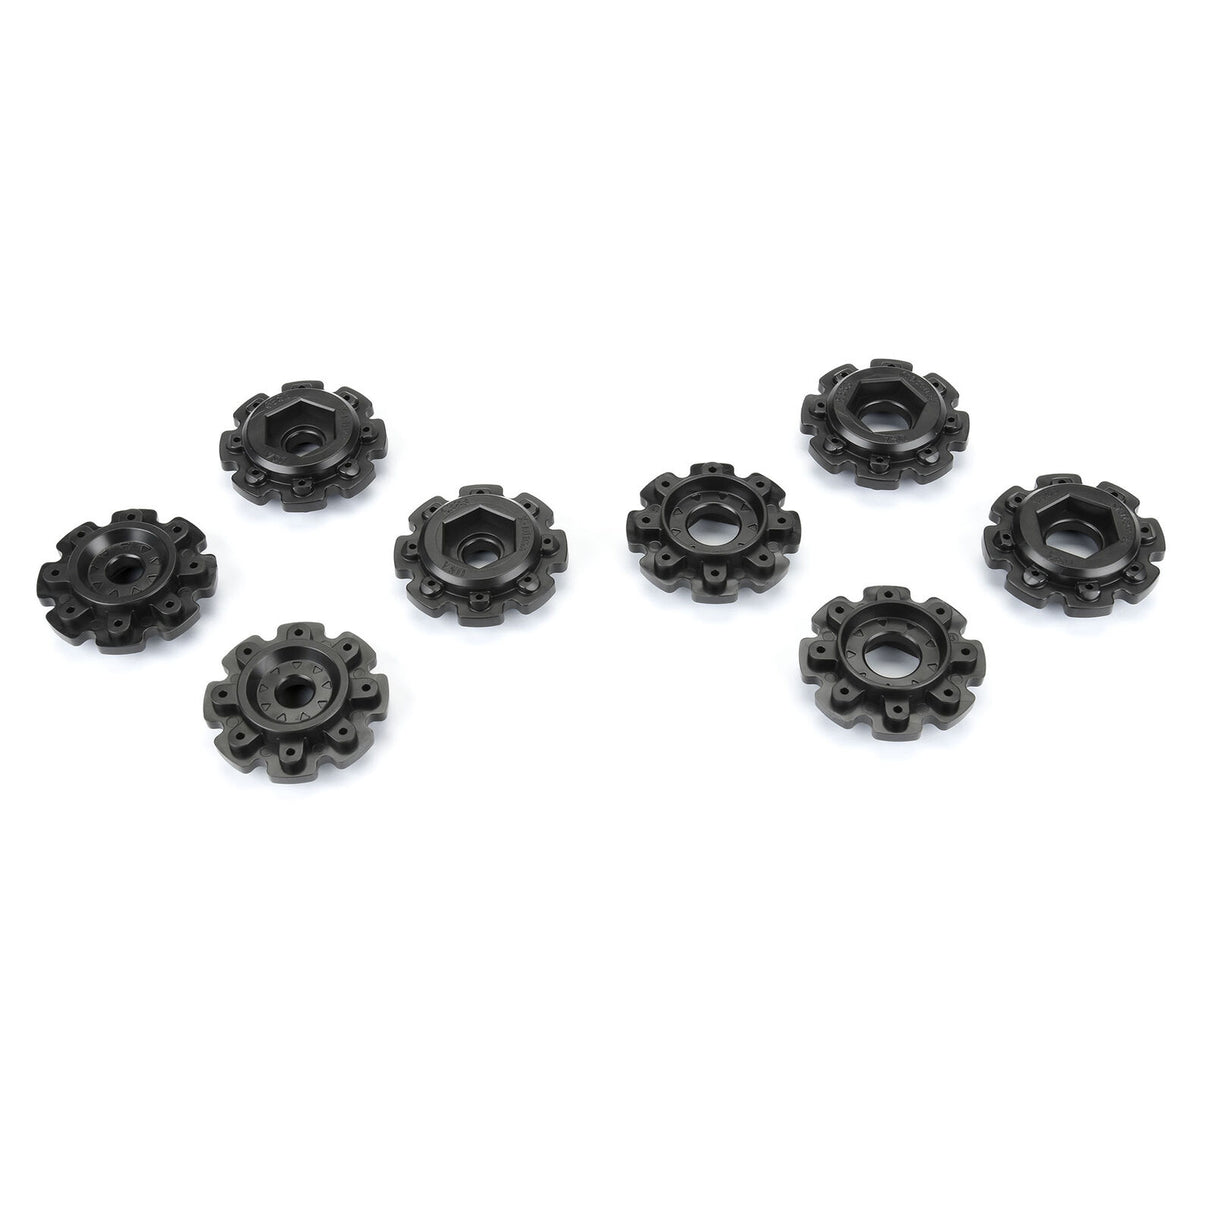 PRO-LINE 6383-00 1/6 8x48 to 24mm Hex Adapters: KRATON 8S & X-MAXX